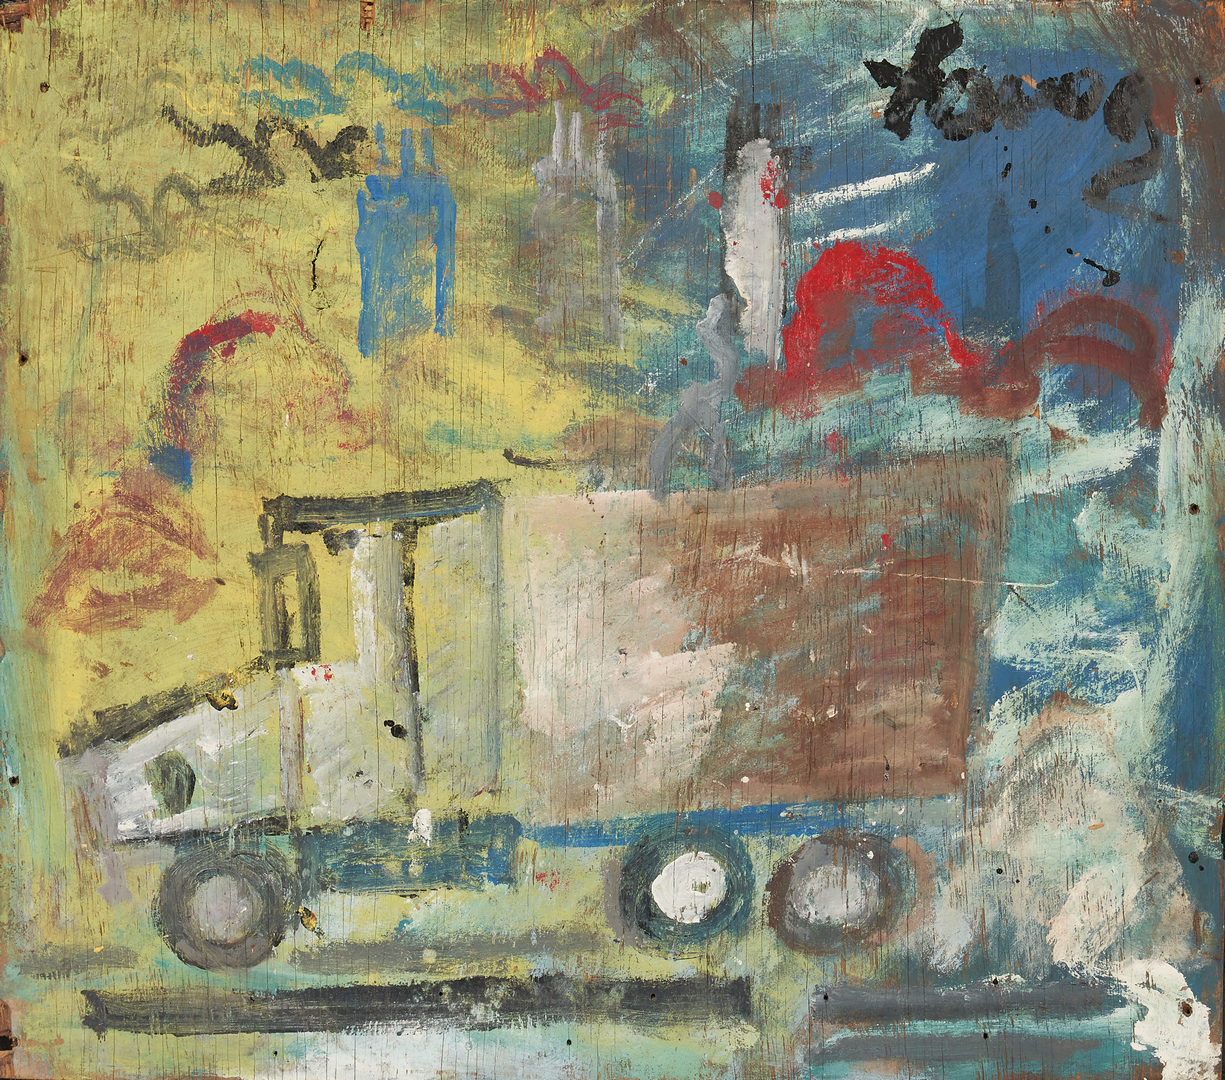 Lot 168: Purvis Young Outsider Art Painting, Semi Truck